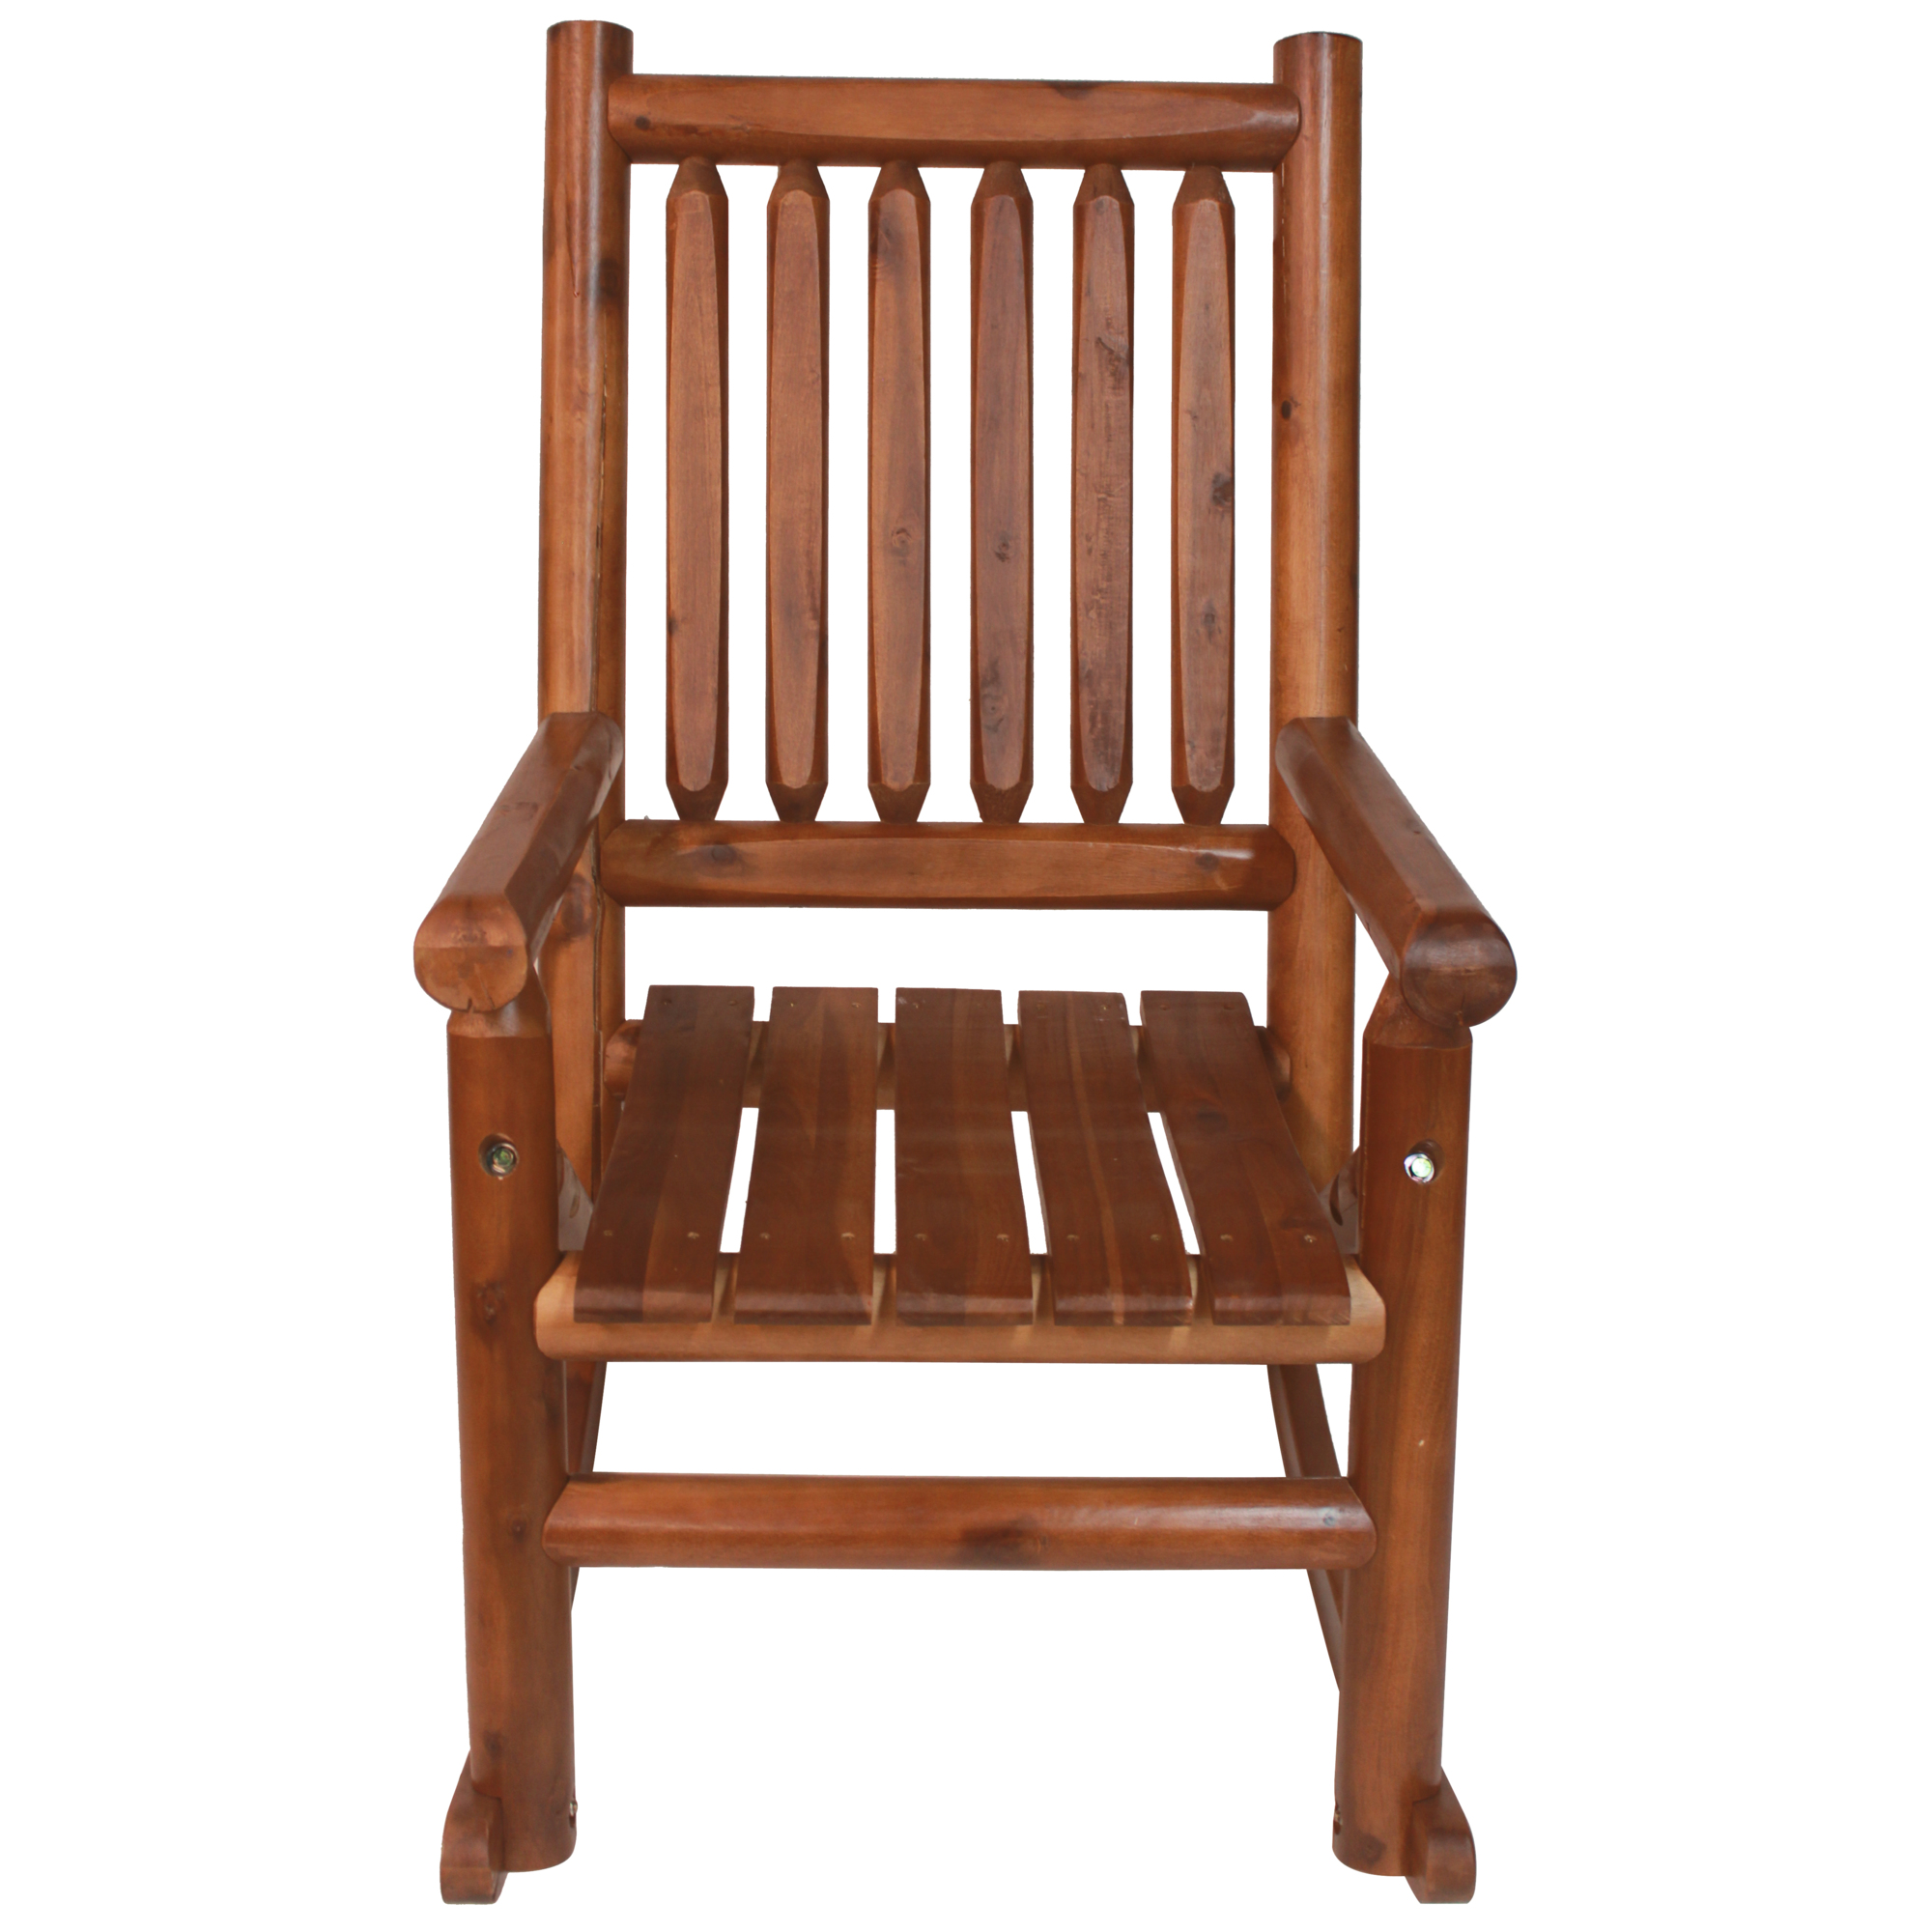 Leigh Country, Amber-Log Porch Rocker, Primary Color Brown, Material Wood, Width 26.35 in, Model TX 36000